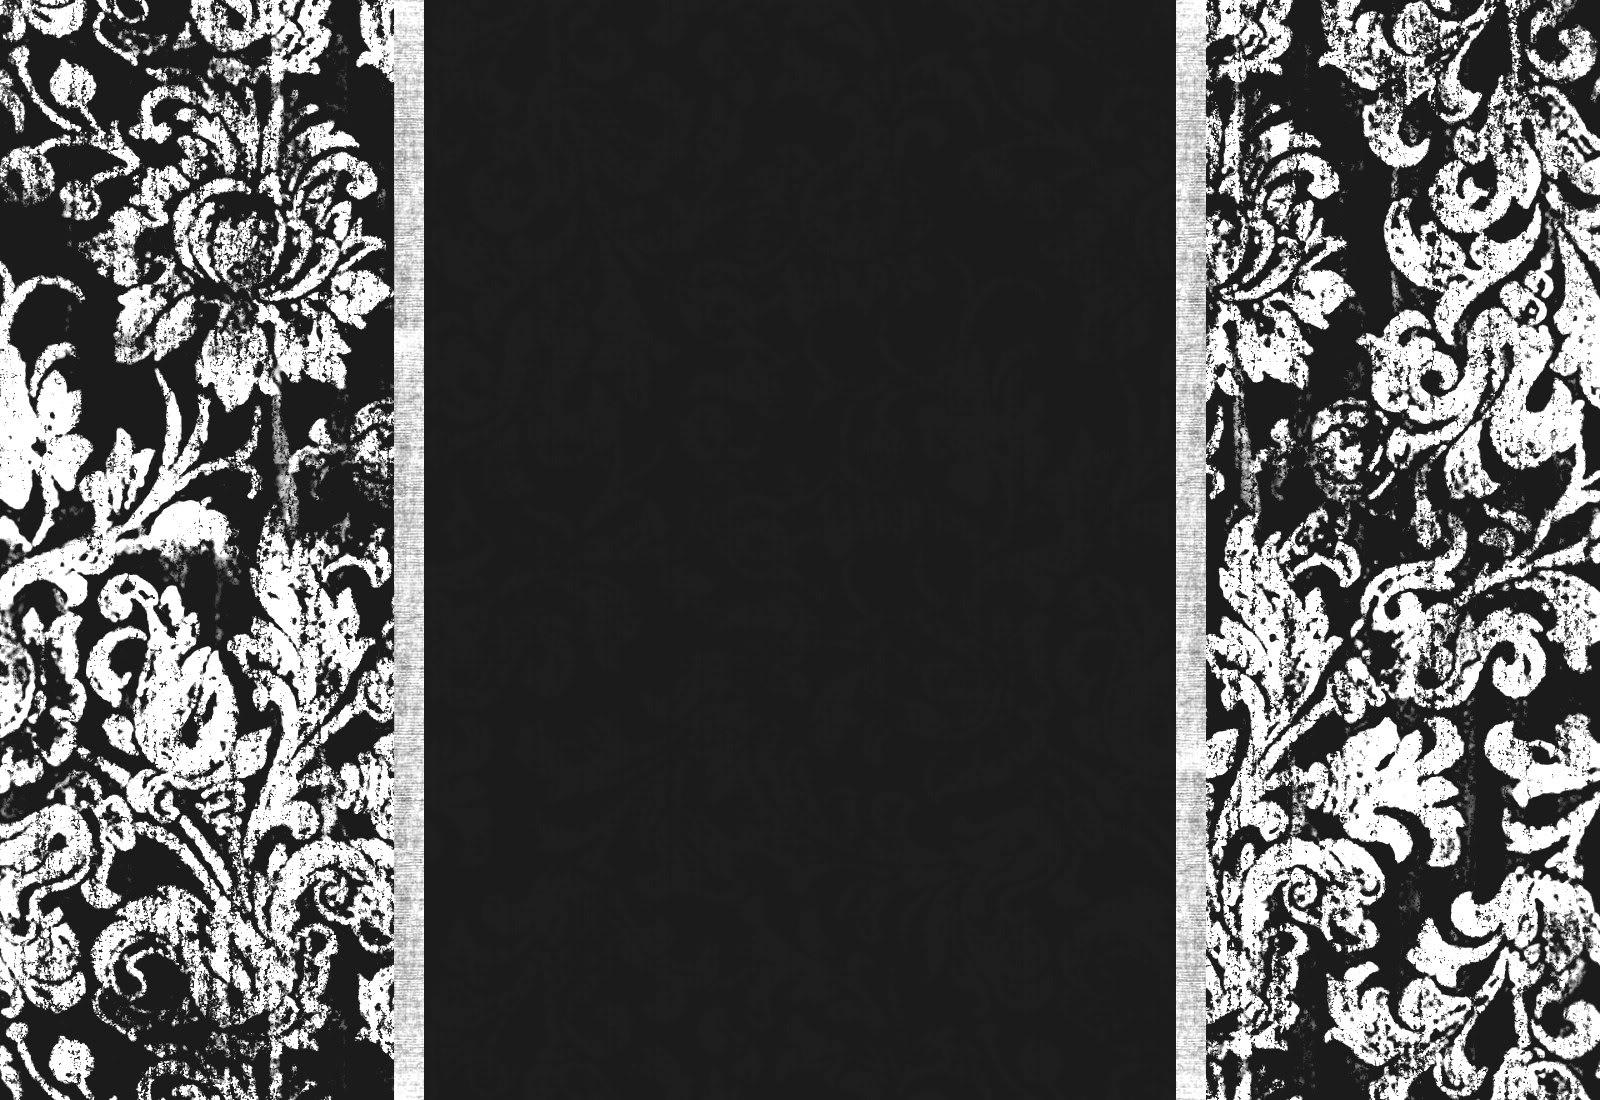 Background Designs Black And White Flowers Image Pictures Becuo